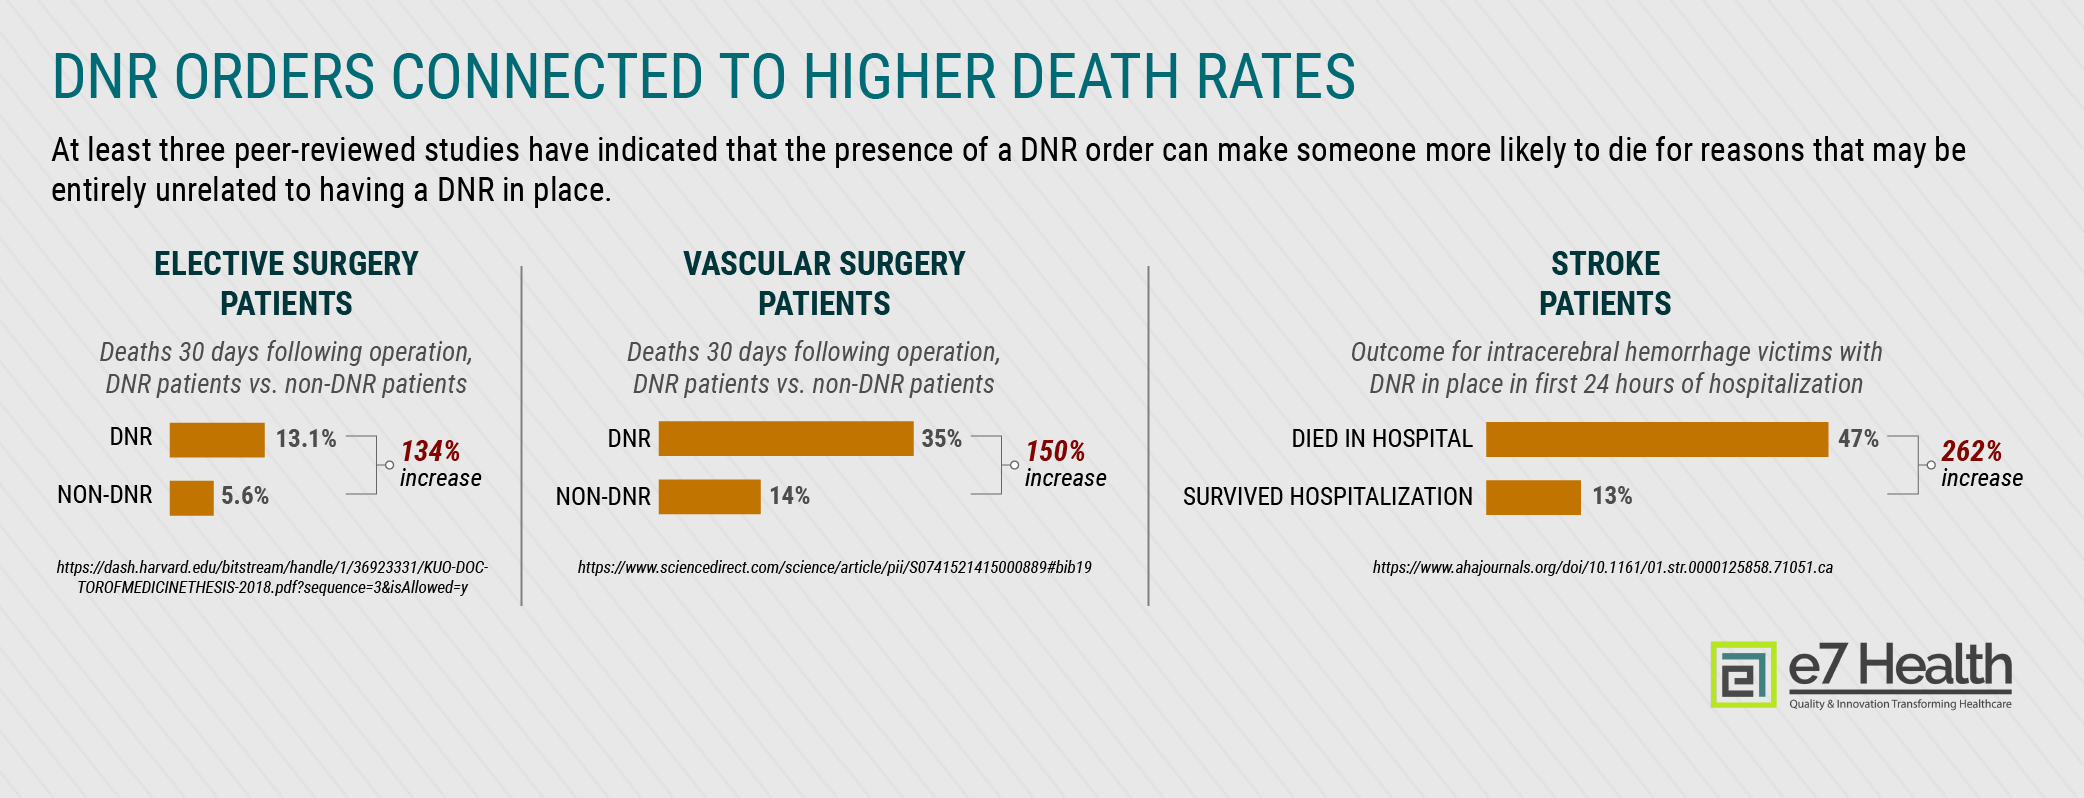 Death Rate Studies Related to DNR